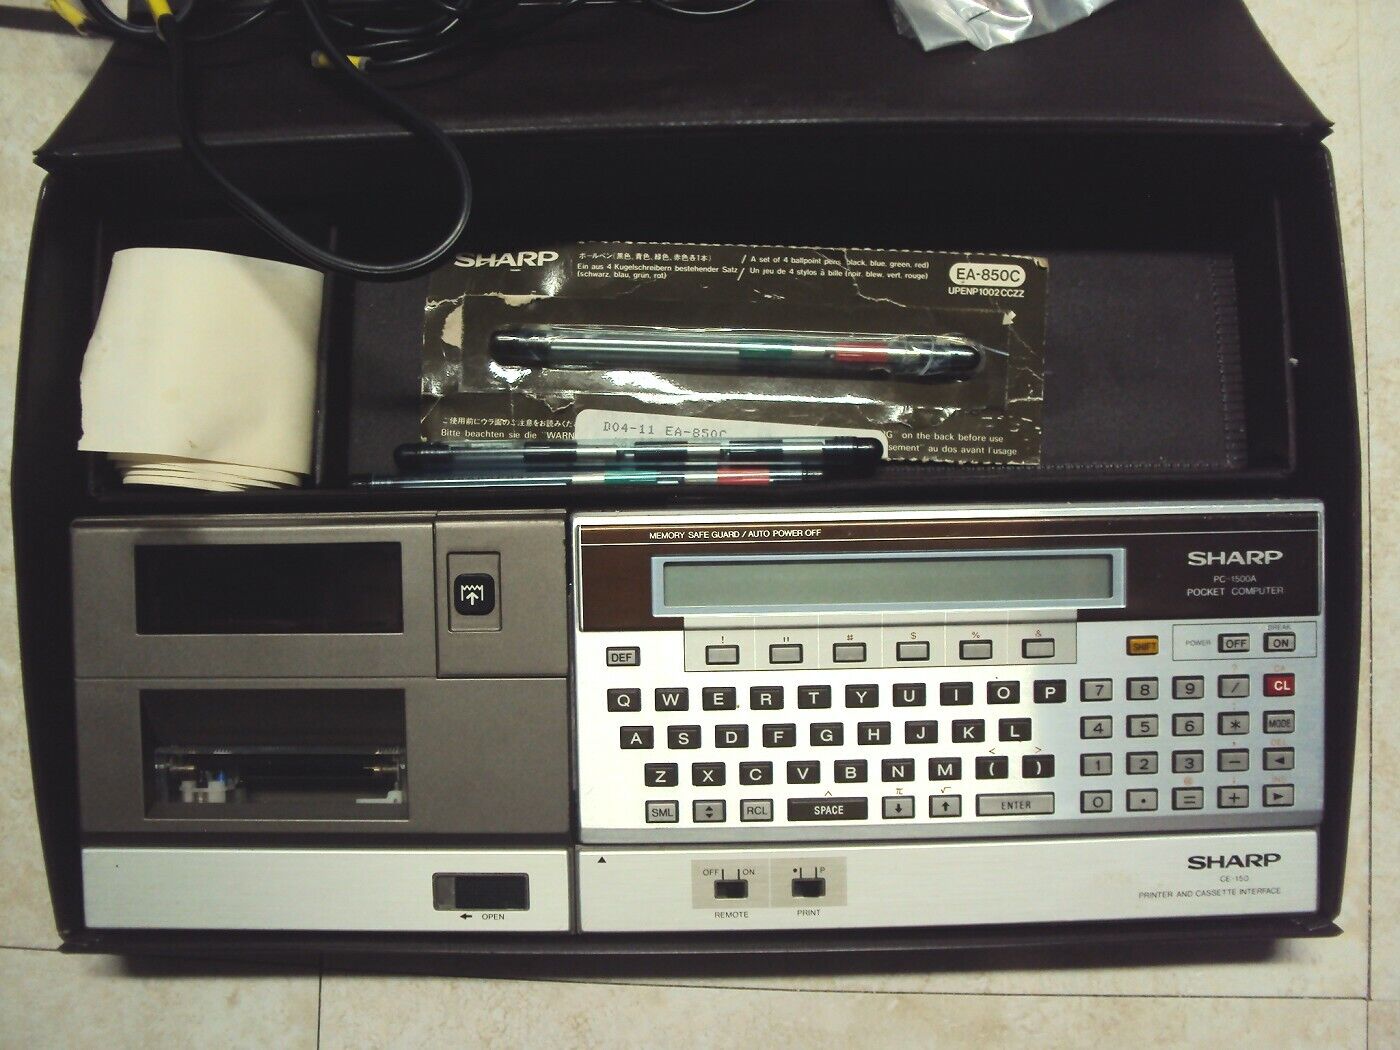 Sharp Portable Microcomputer and Printer, The PC-1500A powers up OK, very Clean